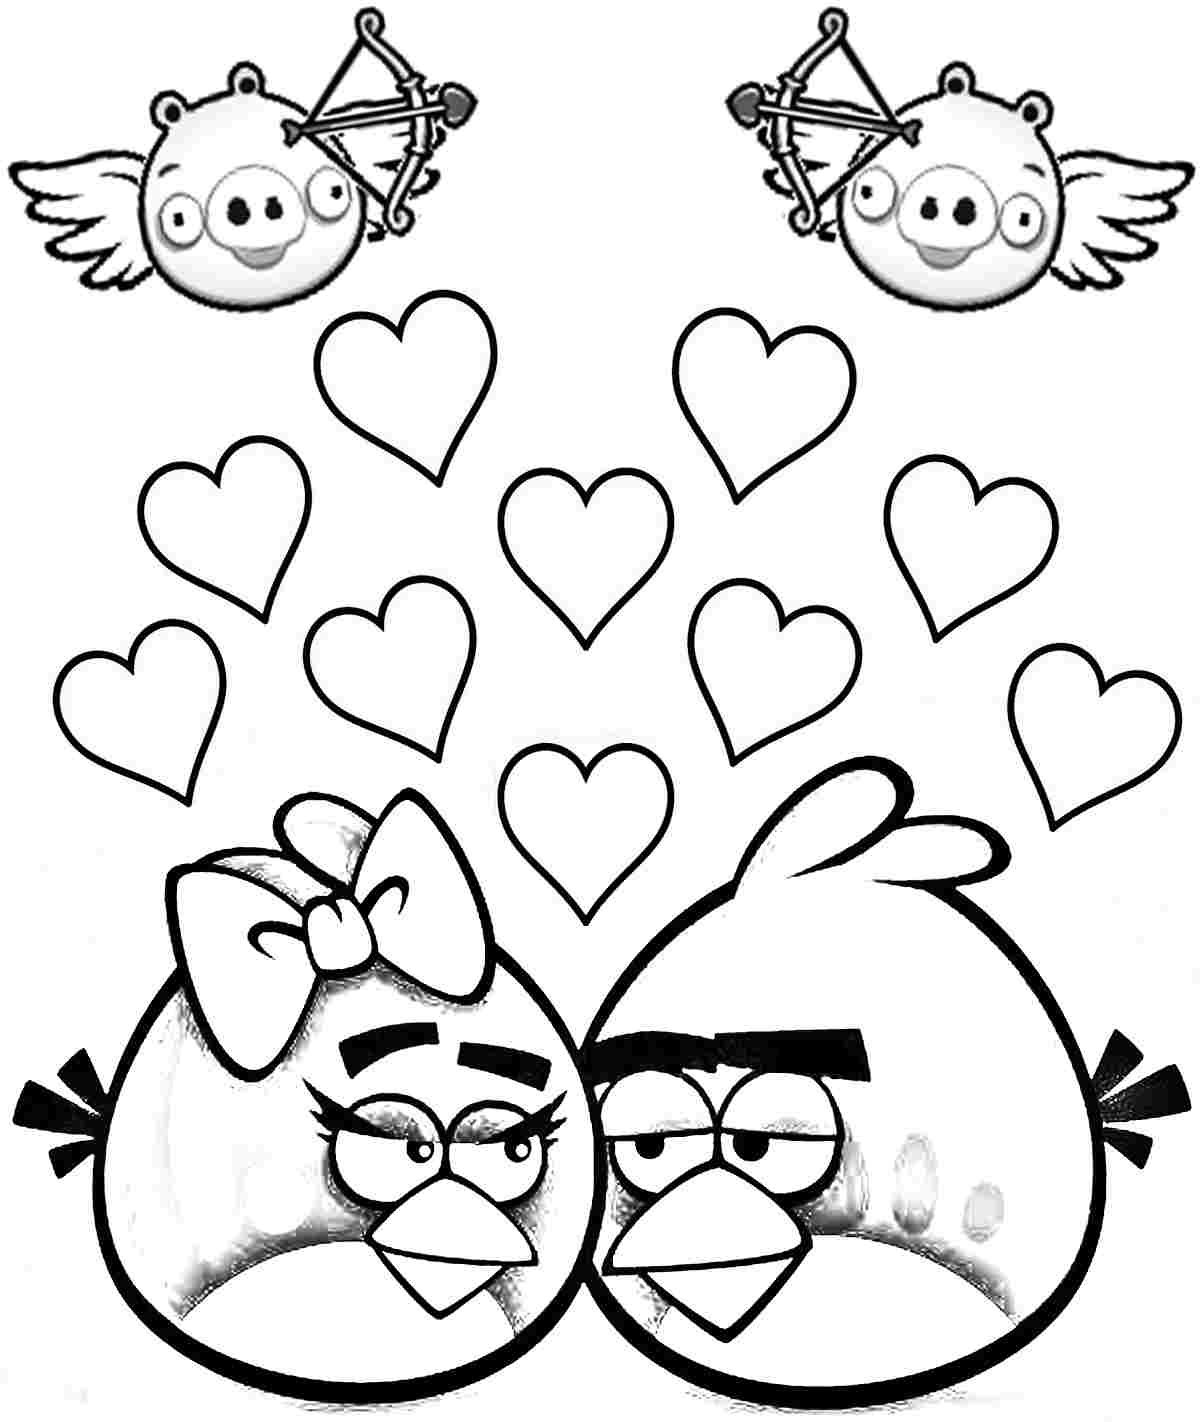 12 Pics of Angry Birds Valentine Coloring Pages Printable - Angry ...